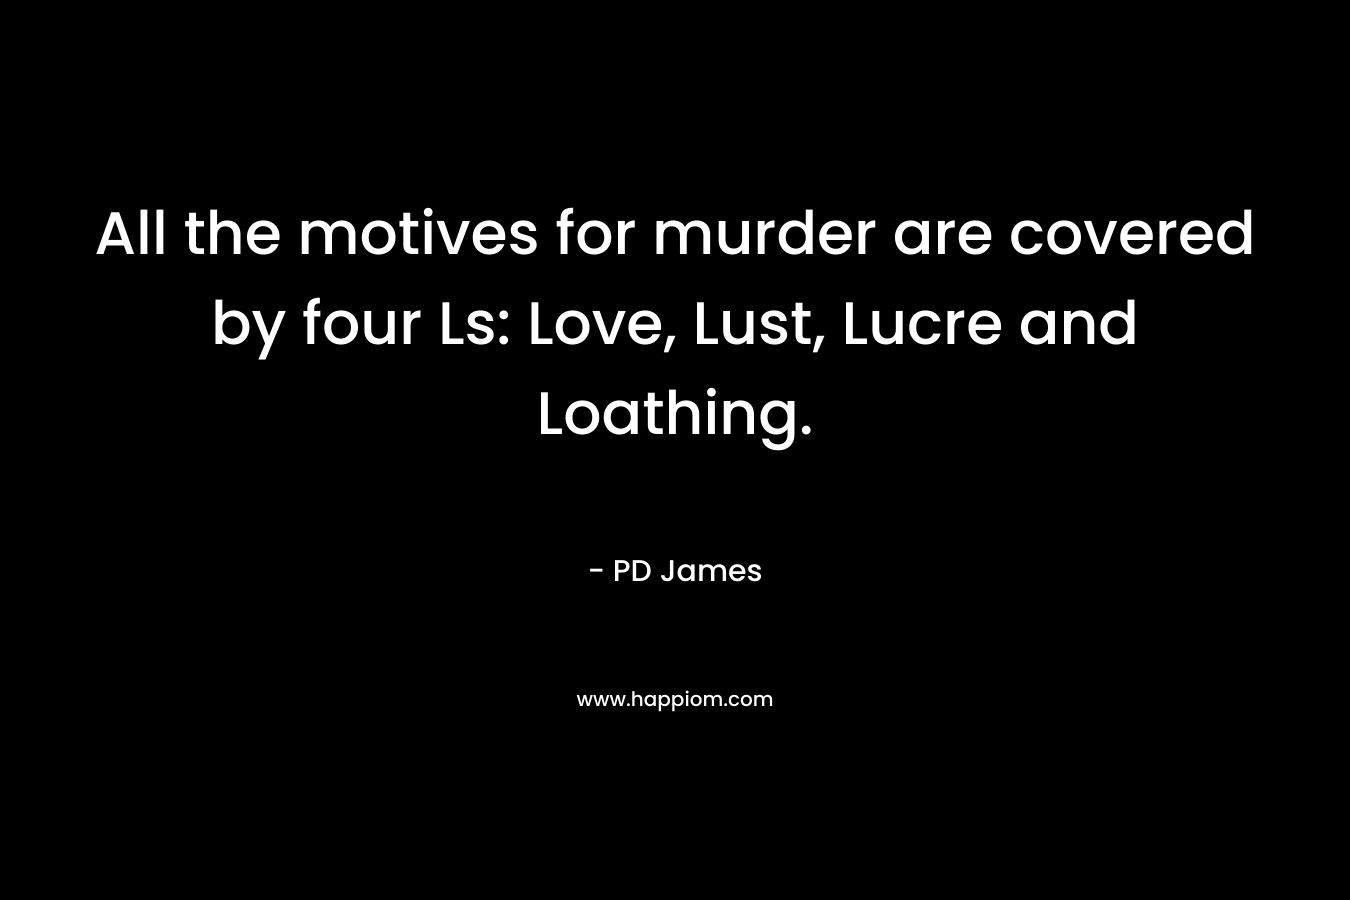 All the motives for murder are covered by four Ls: Love, Lust, Lucre and Loathing.